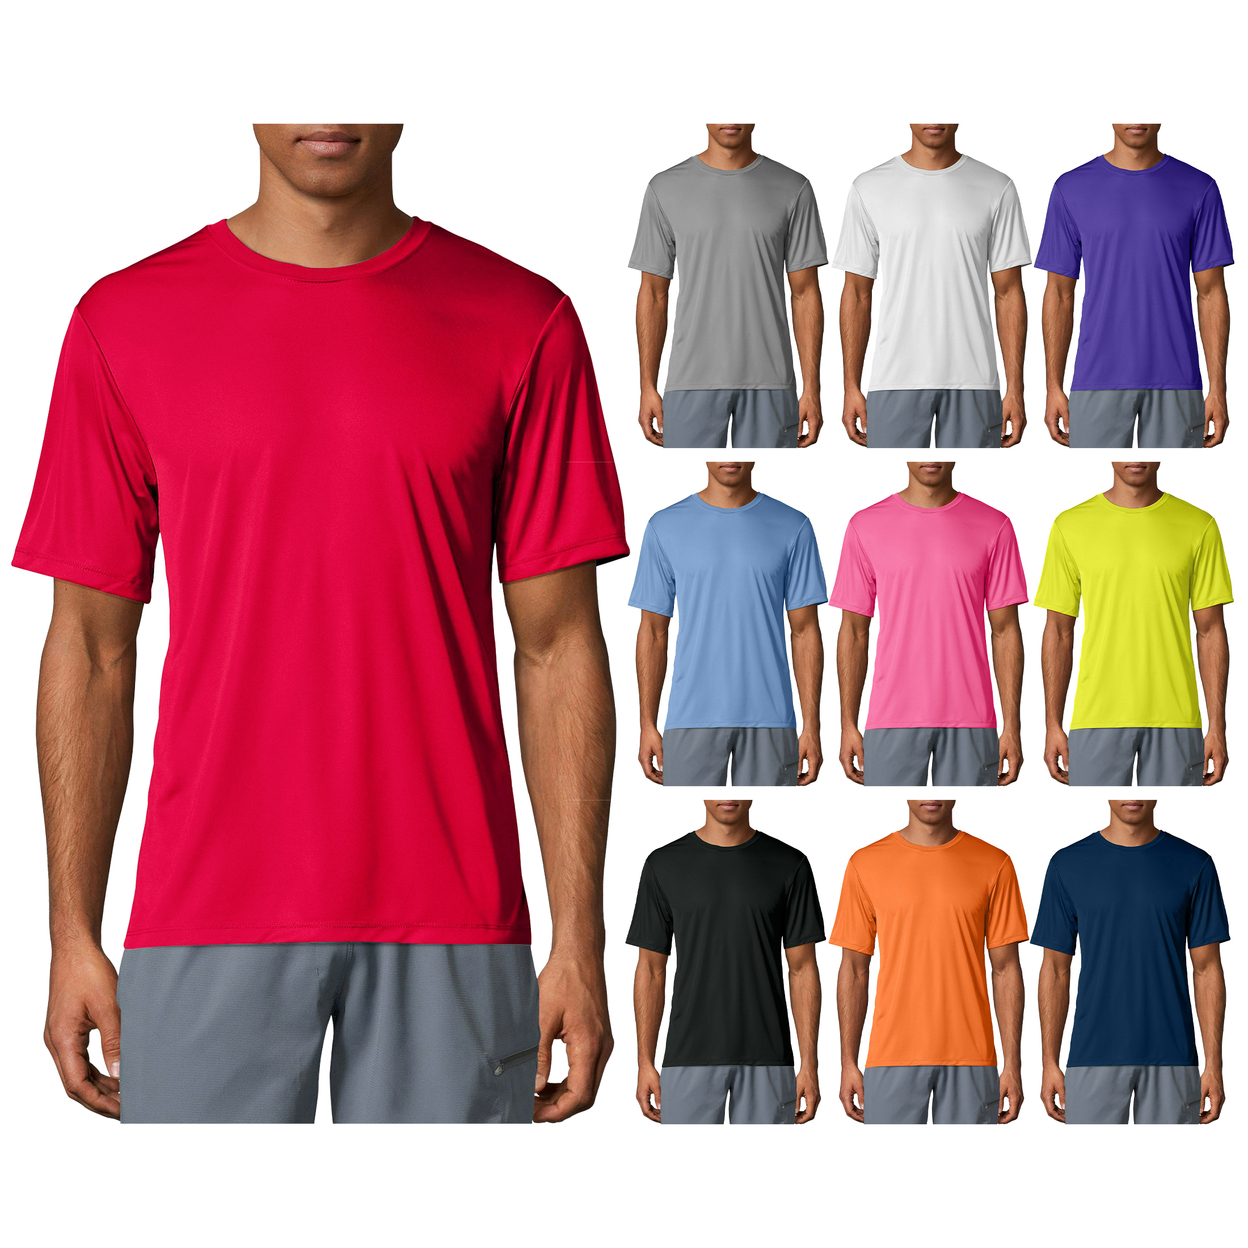 4-Pack: Men's Moisture Wicking Cool Dri-Fit Performance Short Sleeve Crew Neck T-Shirts - Small